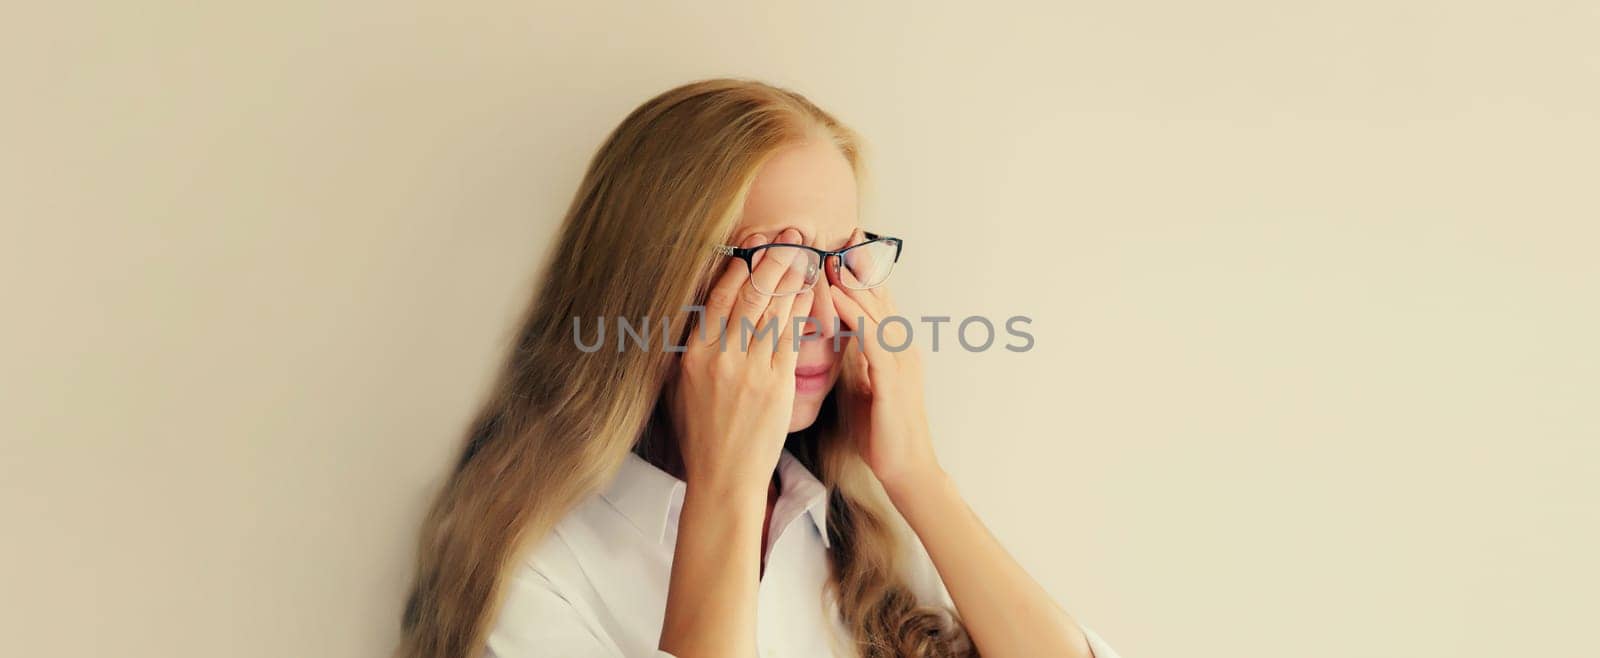 Tired overworked woman employee rubbing her eyes suffering from eye strain, dry eye syndrome by Rohappy